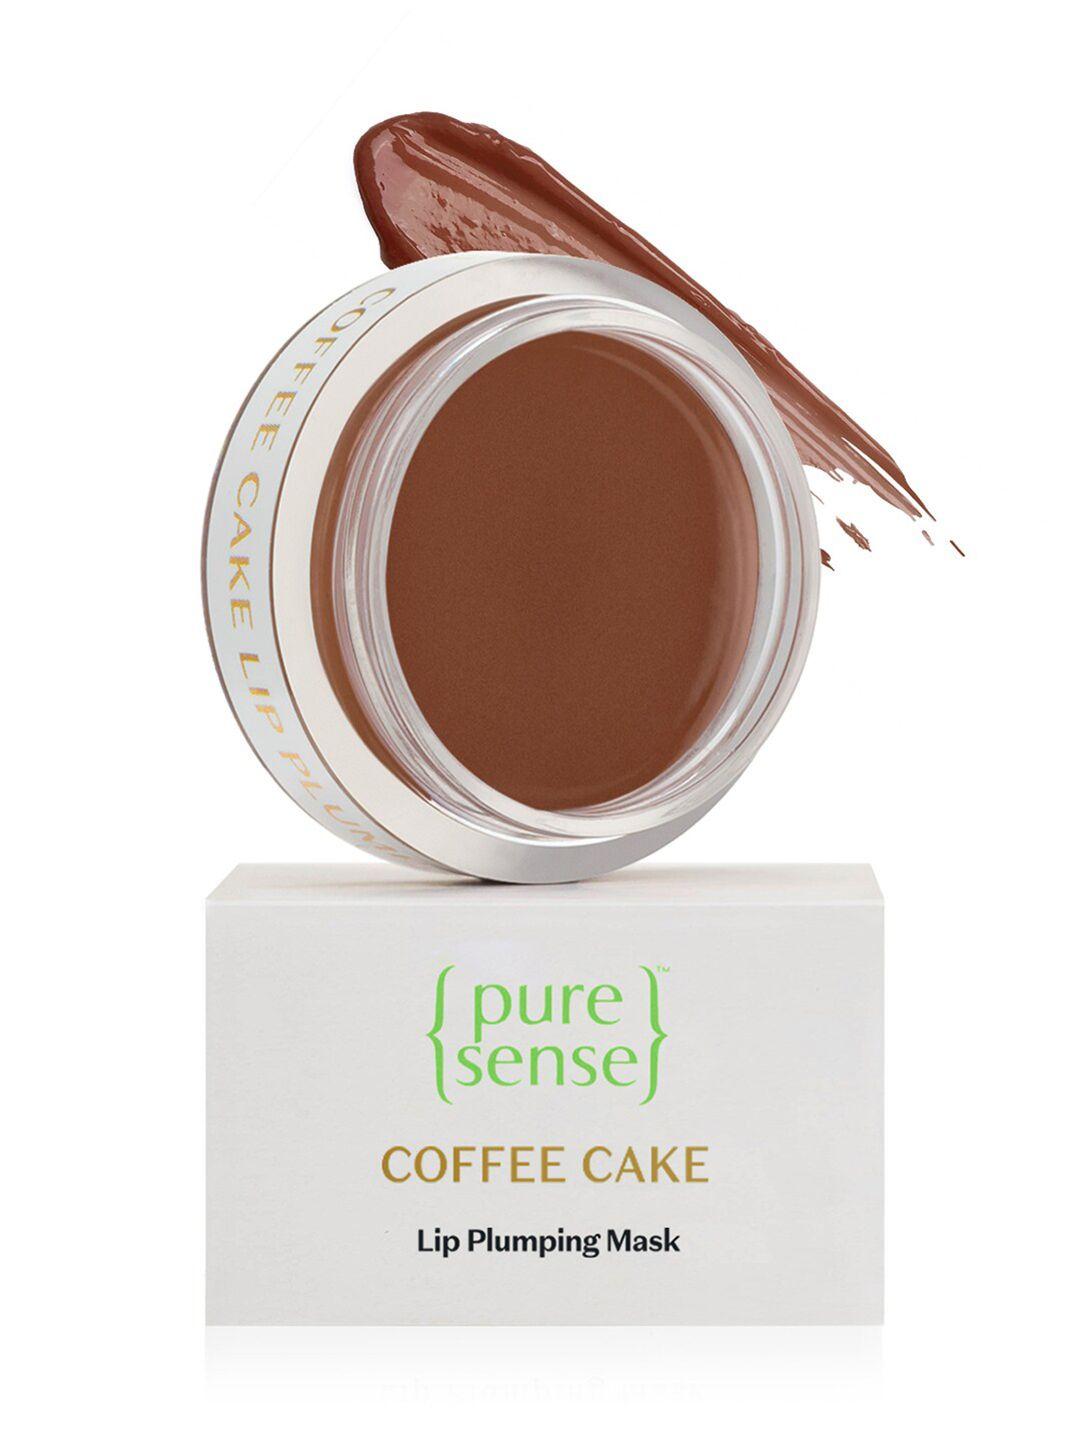 pure sense coffee cake lip plumping mask for sensitive, dry, chapped & pigmented lips - 5g